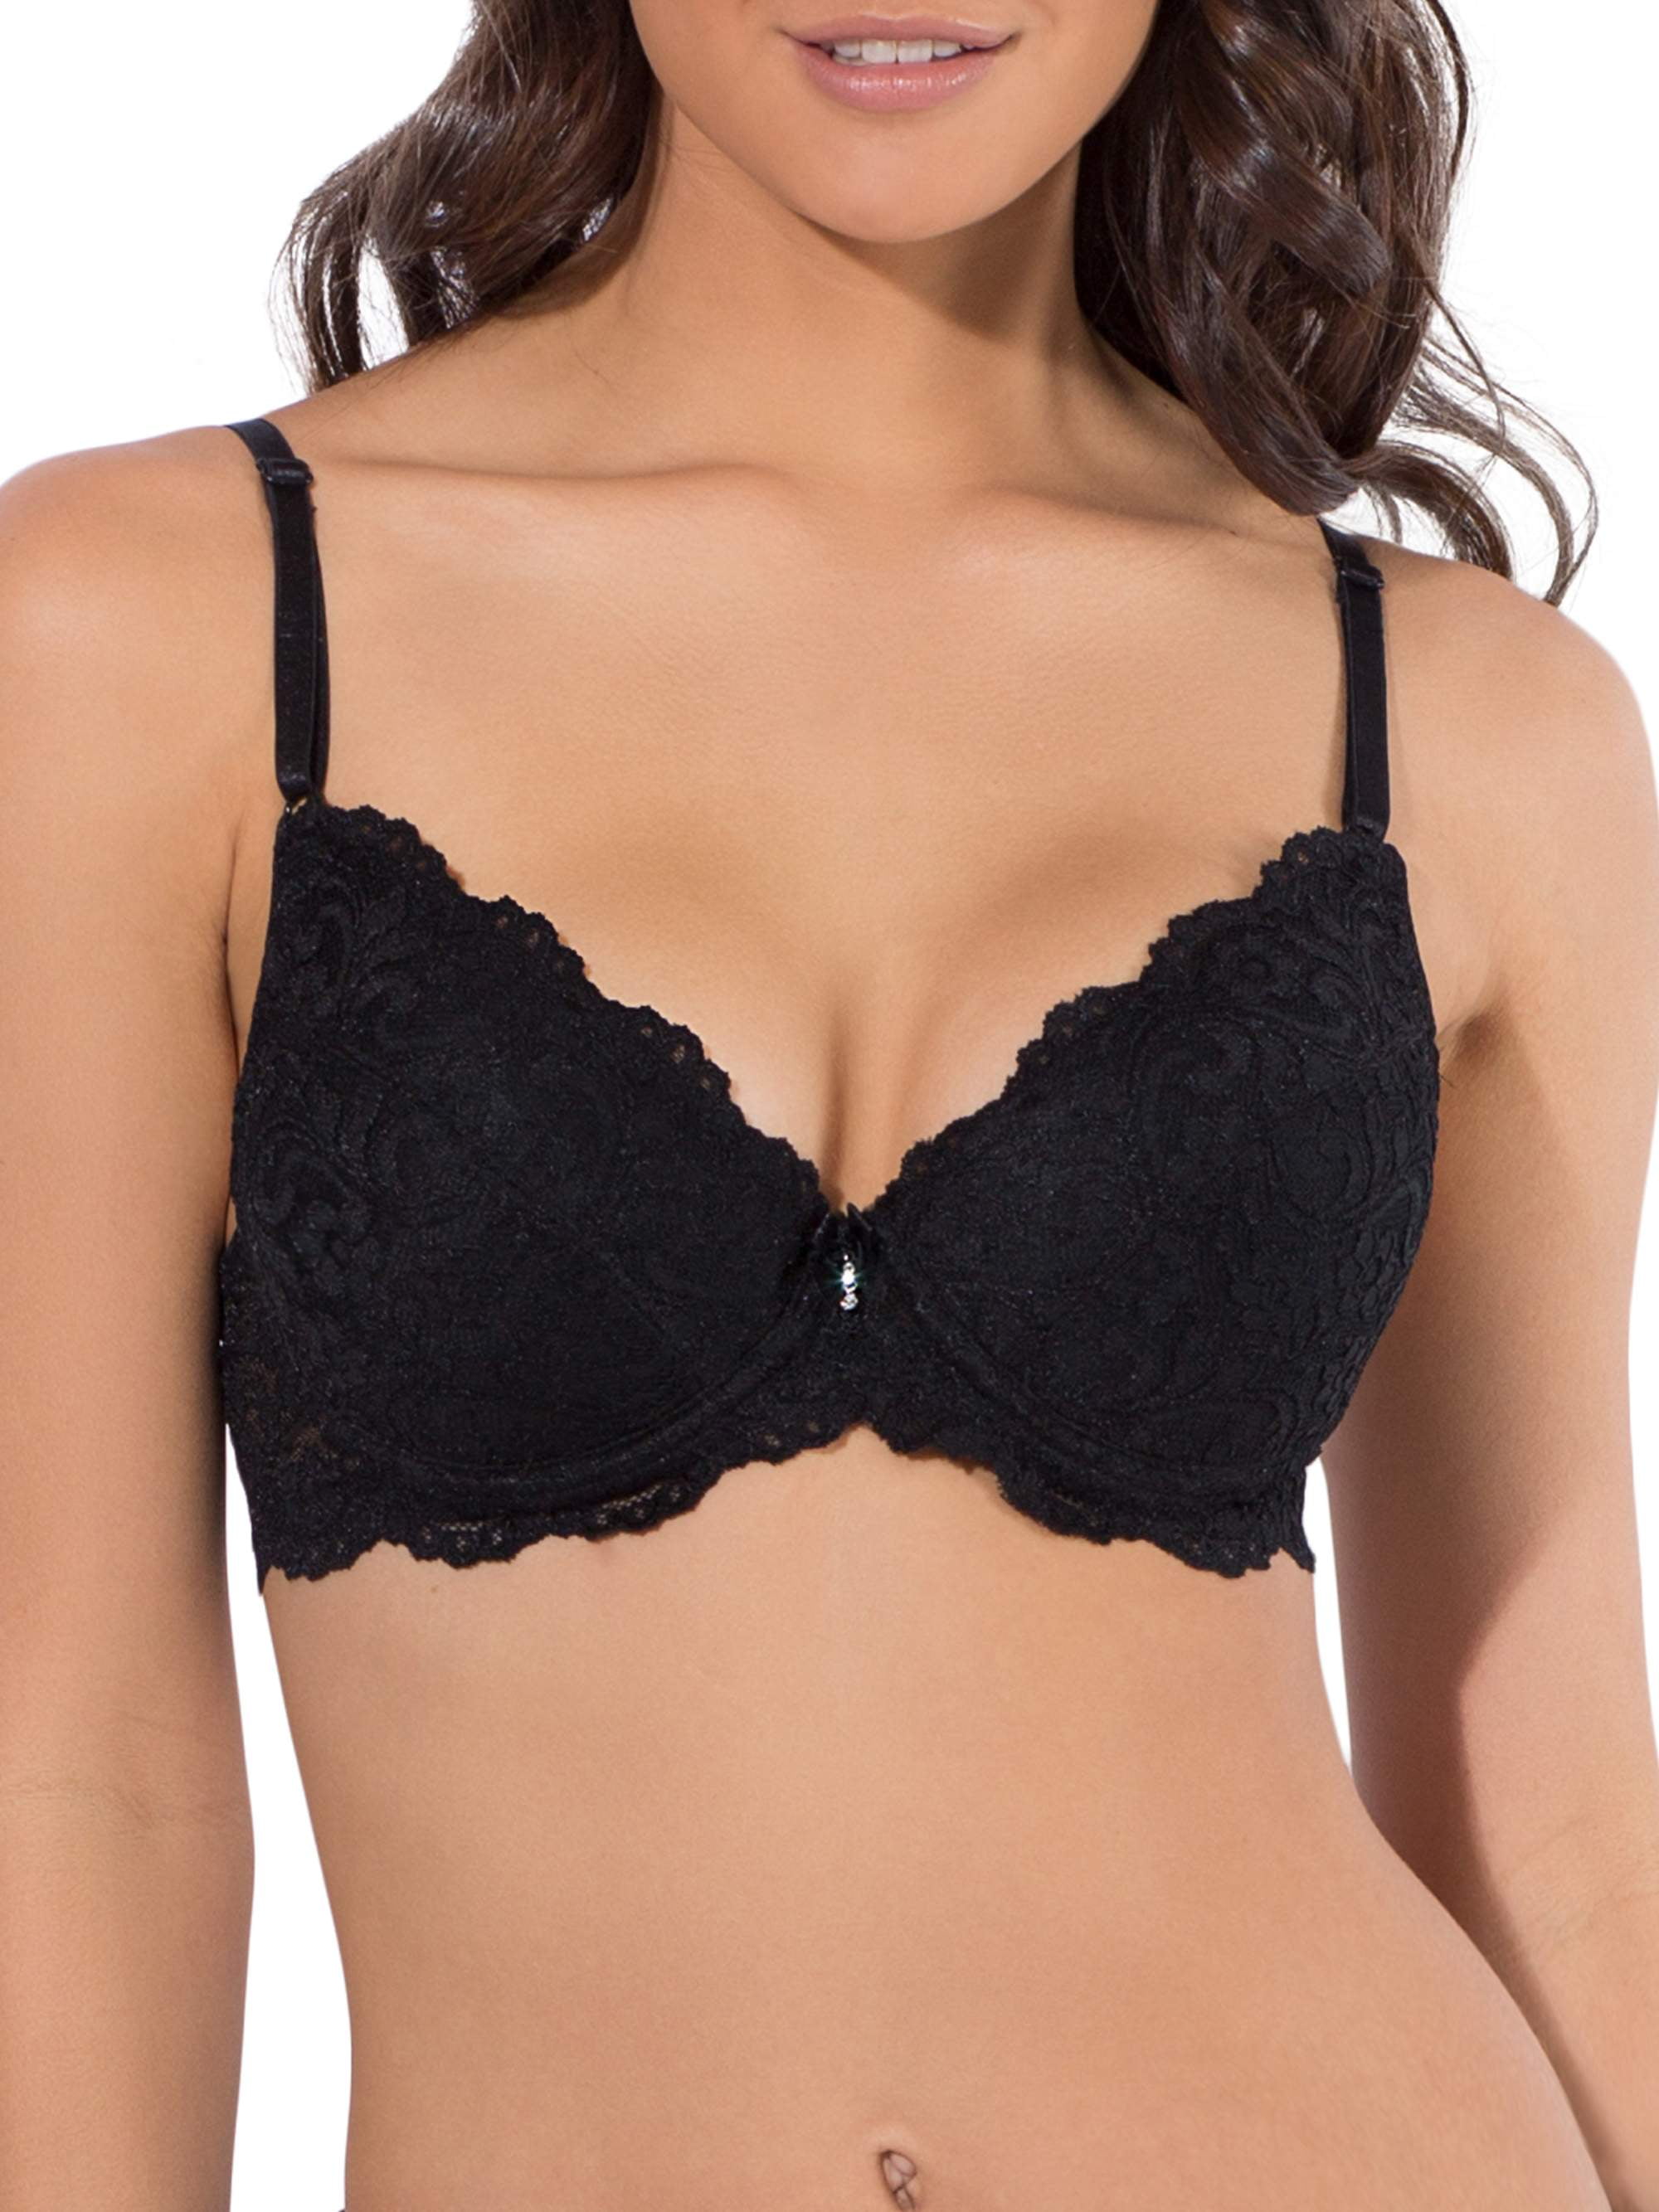 Penti Lebanon - Push up bras are known for enhancing your body's look, feel  more confident with black lace push up bra available at our stores. #Penti # Bra #Pushupbra #Lingerie #Sleepwear #Style #